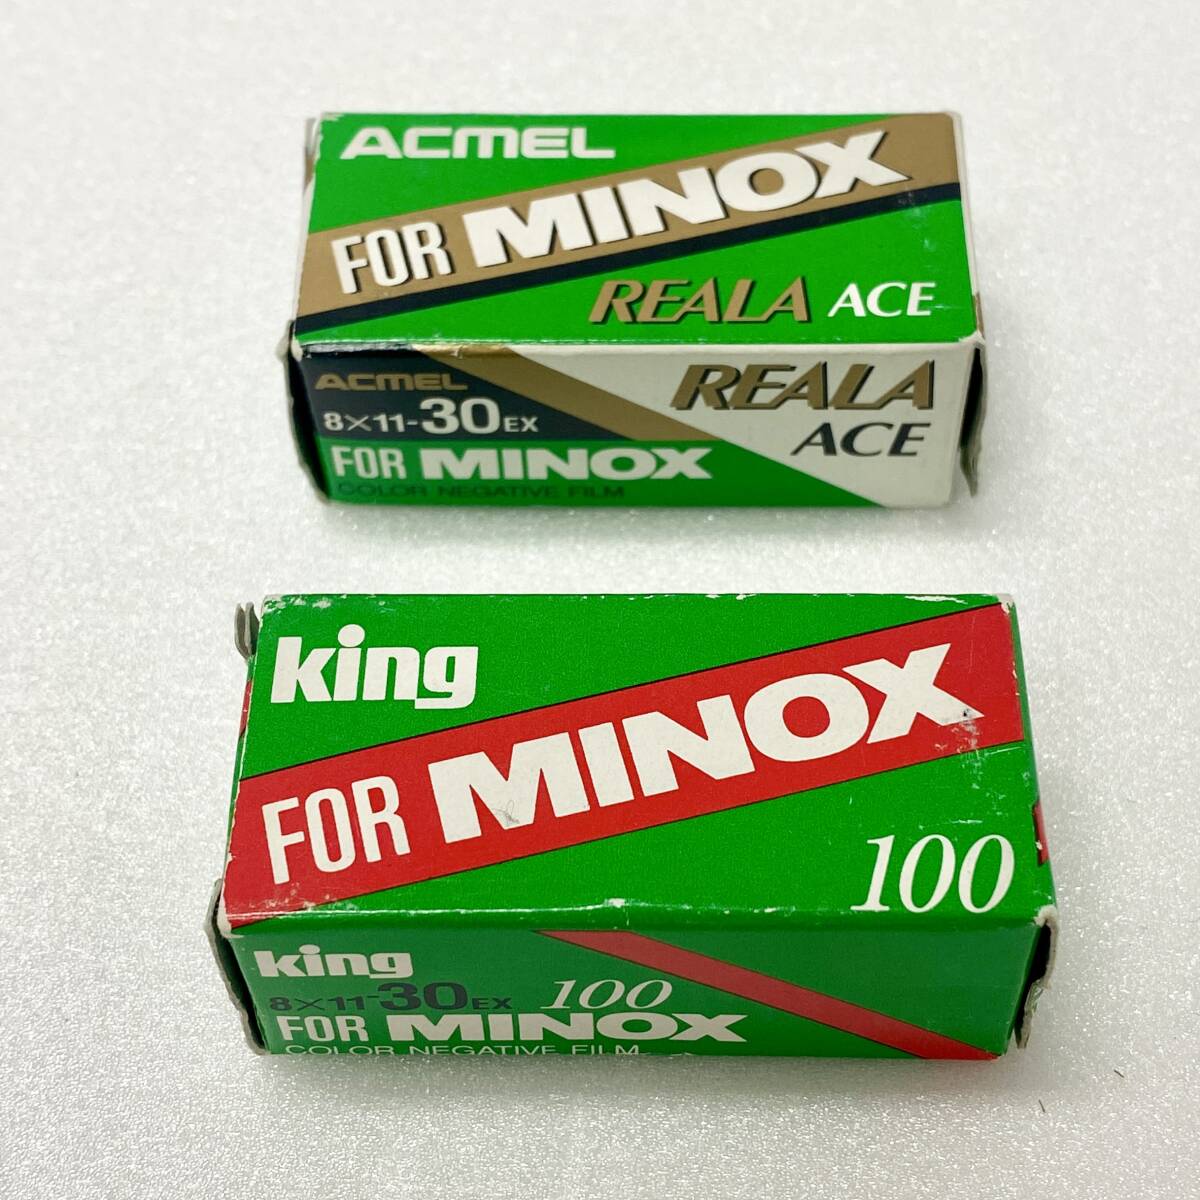 [ operation not yet verification ] MINOX TLX compact camera Spy camera film camera 1:3.5 f=15mmmi knock s present condition goods junk treatment secondhand goods 